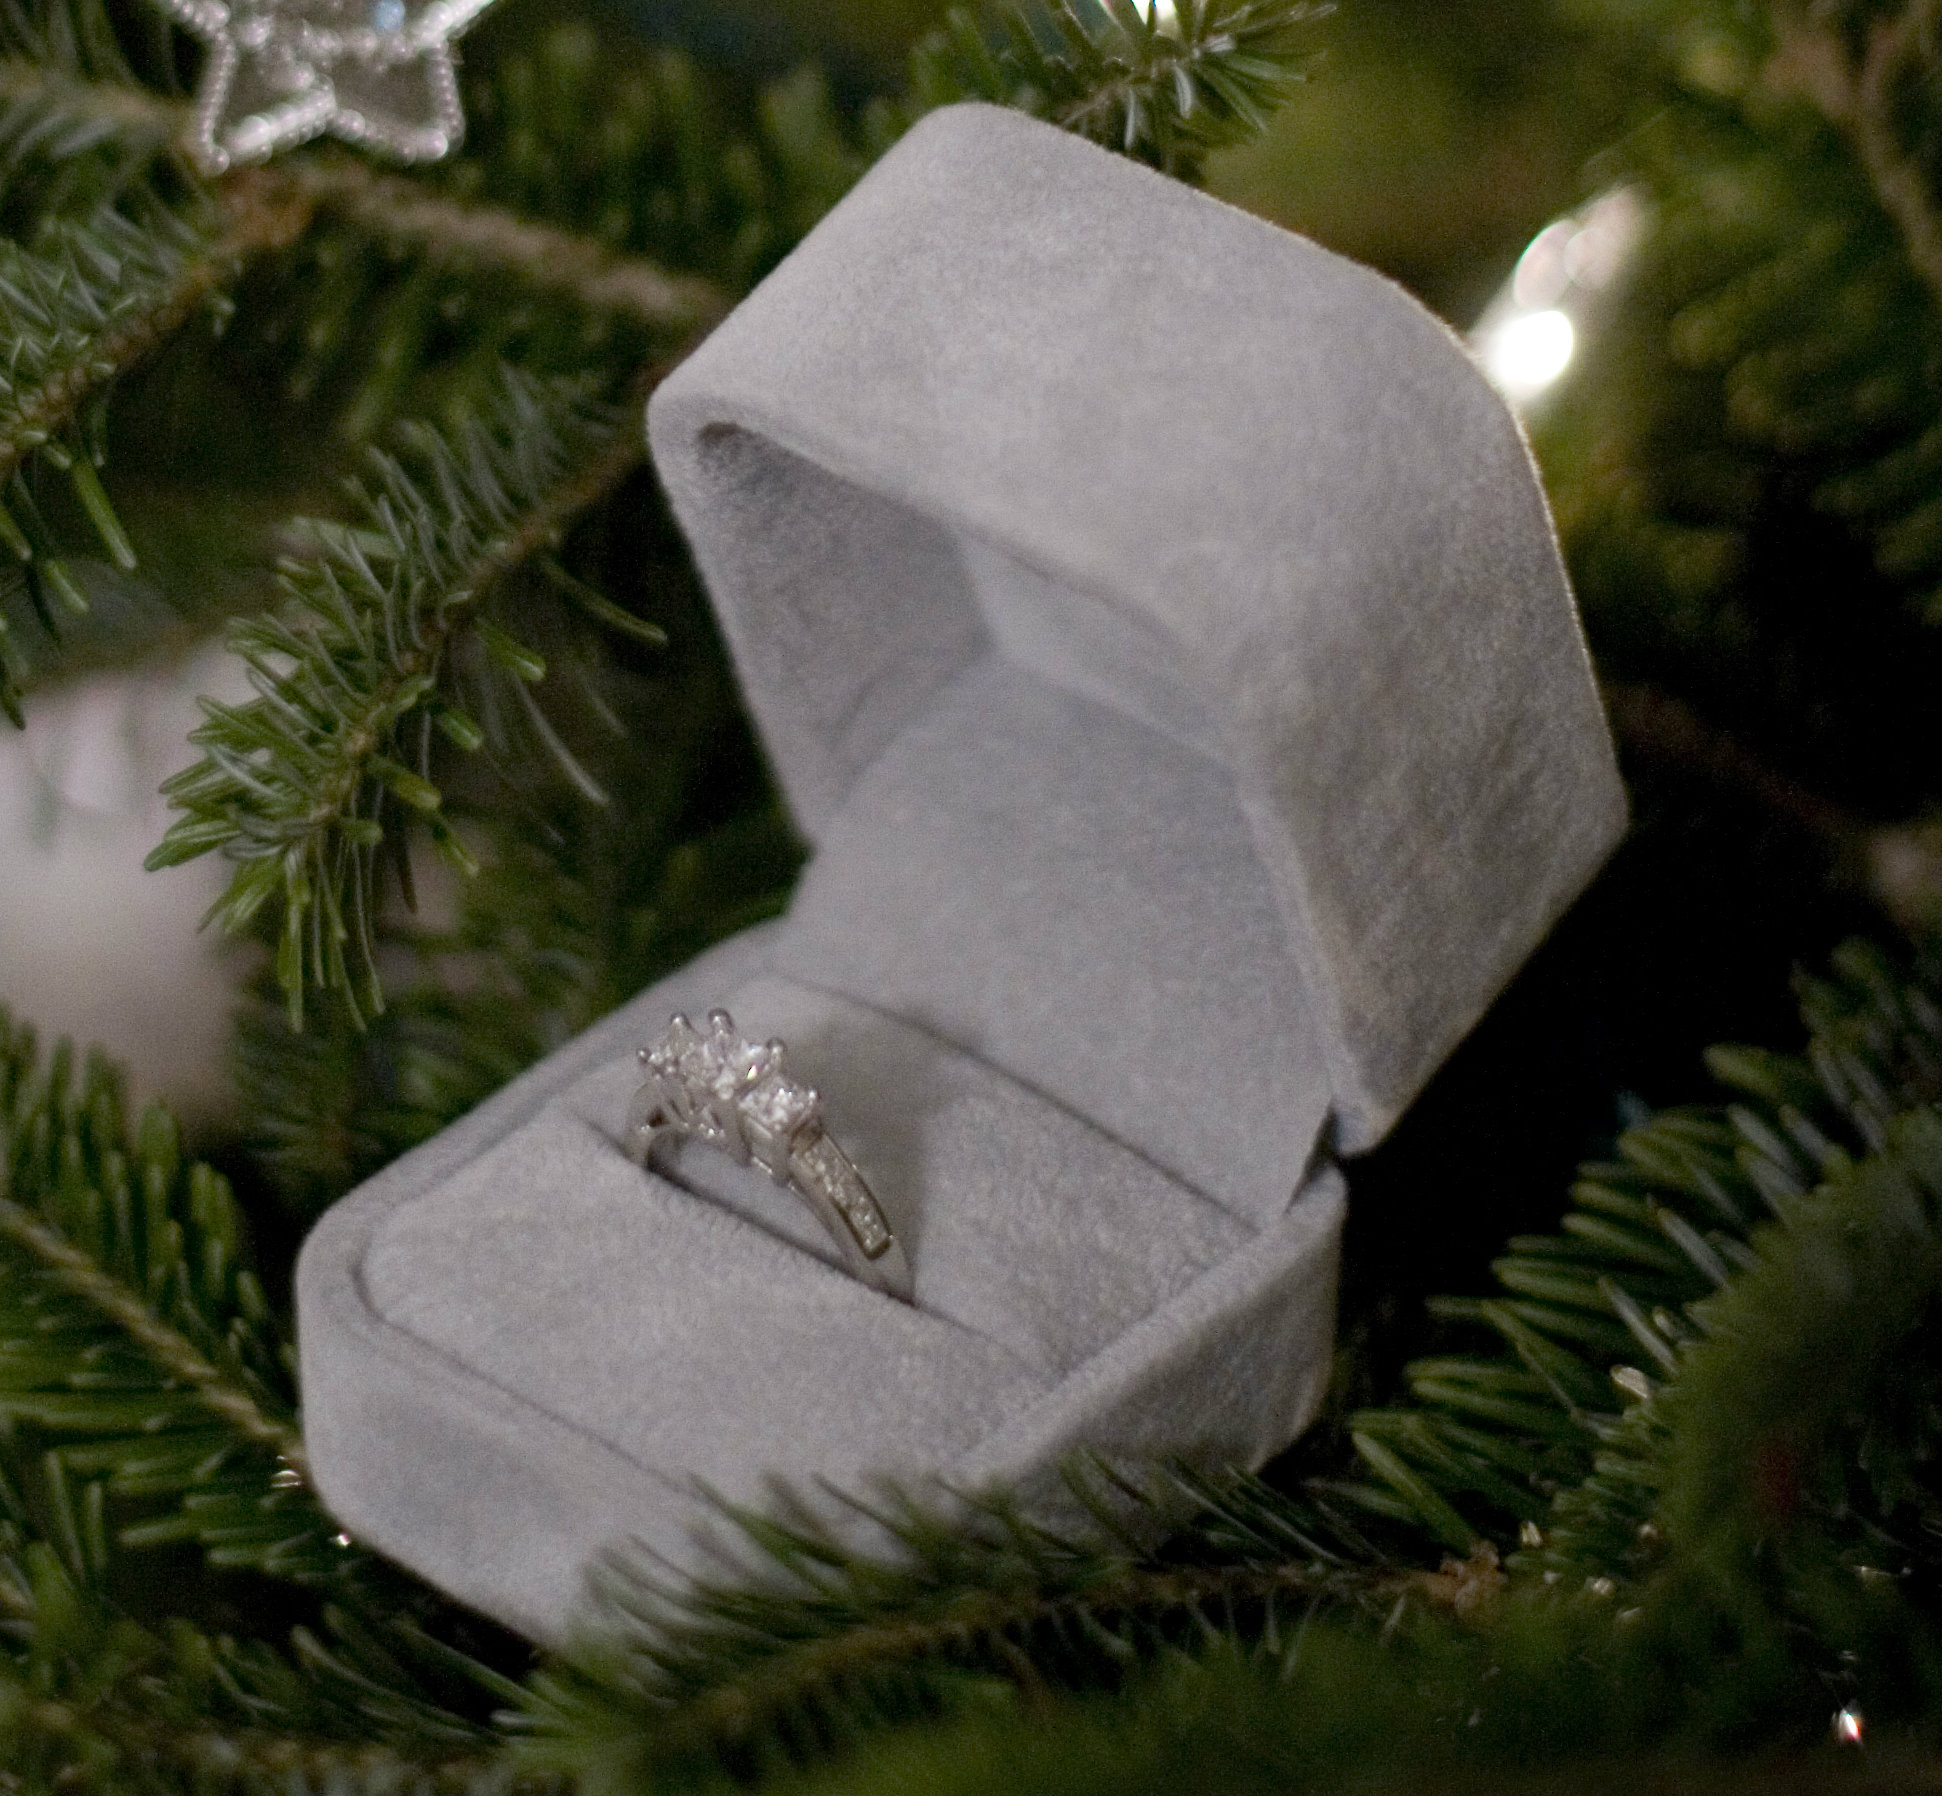 Have a Very Merry Proposal!